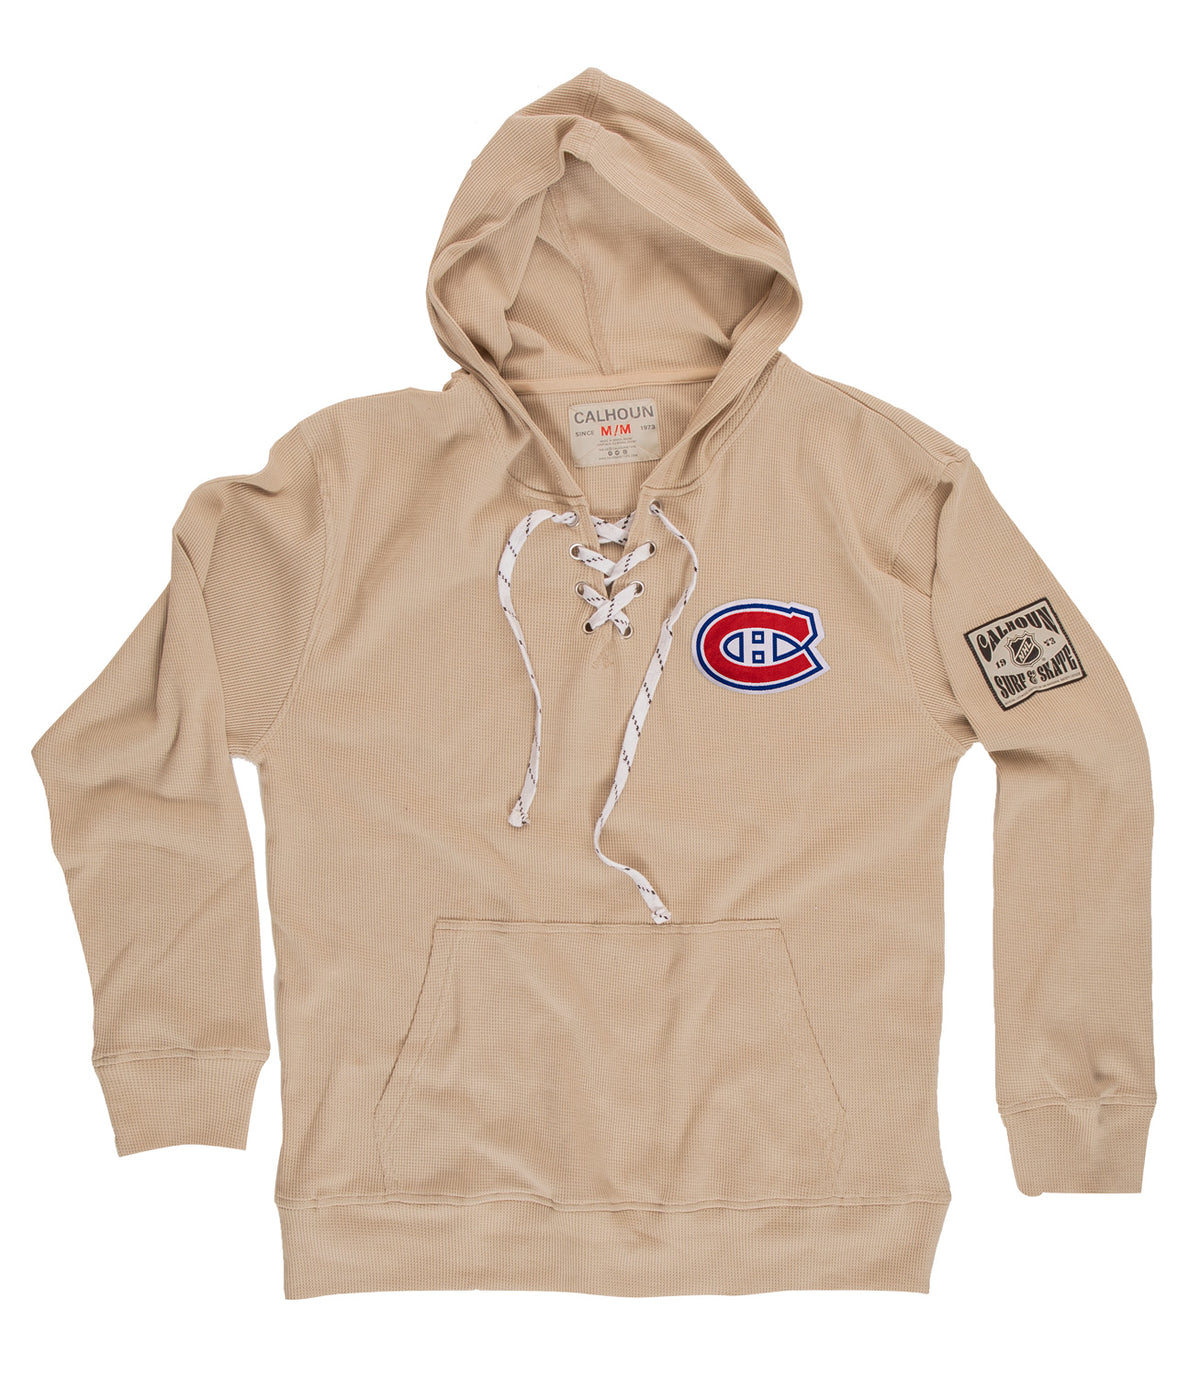 Montreal Canadiens Waffle Texture Hockey Lace Hoodie Laying Flat